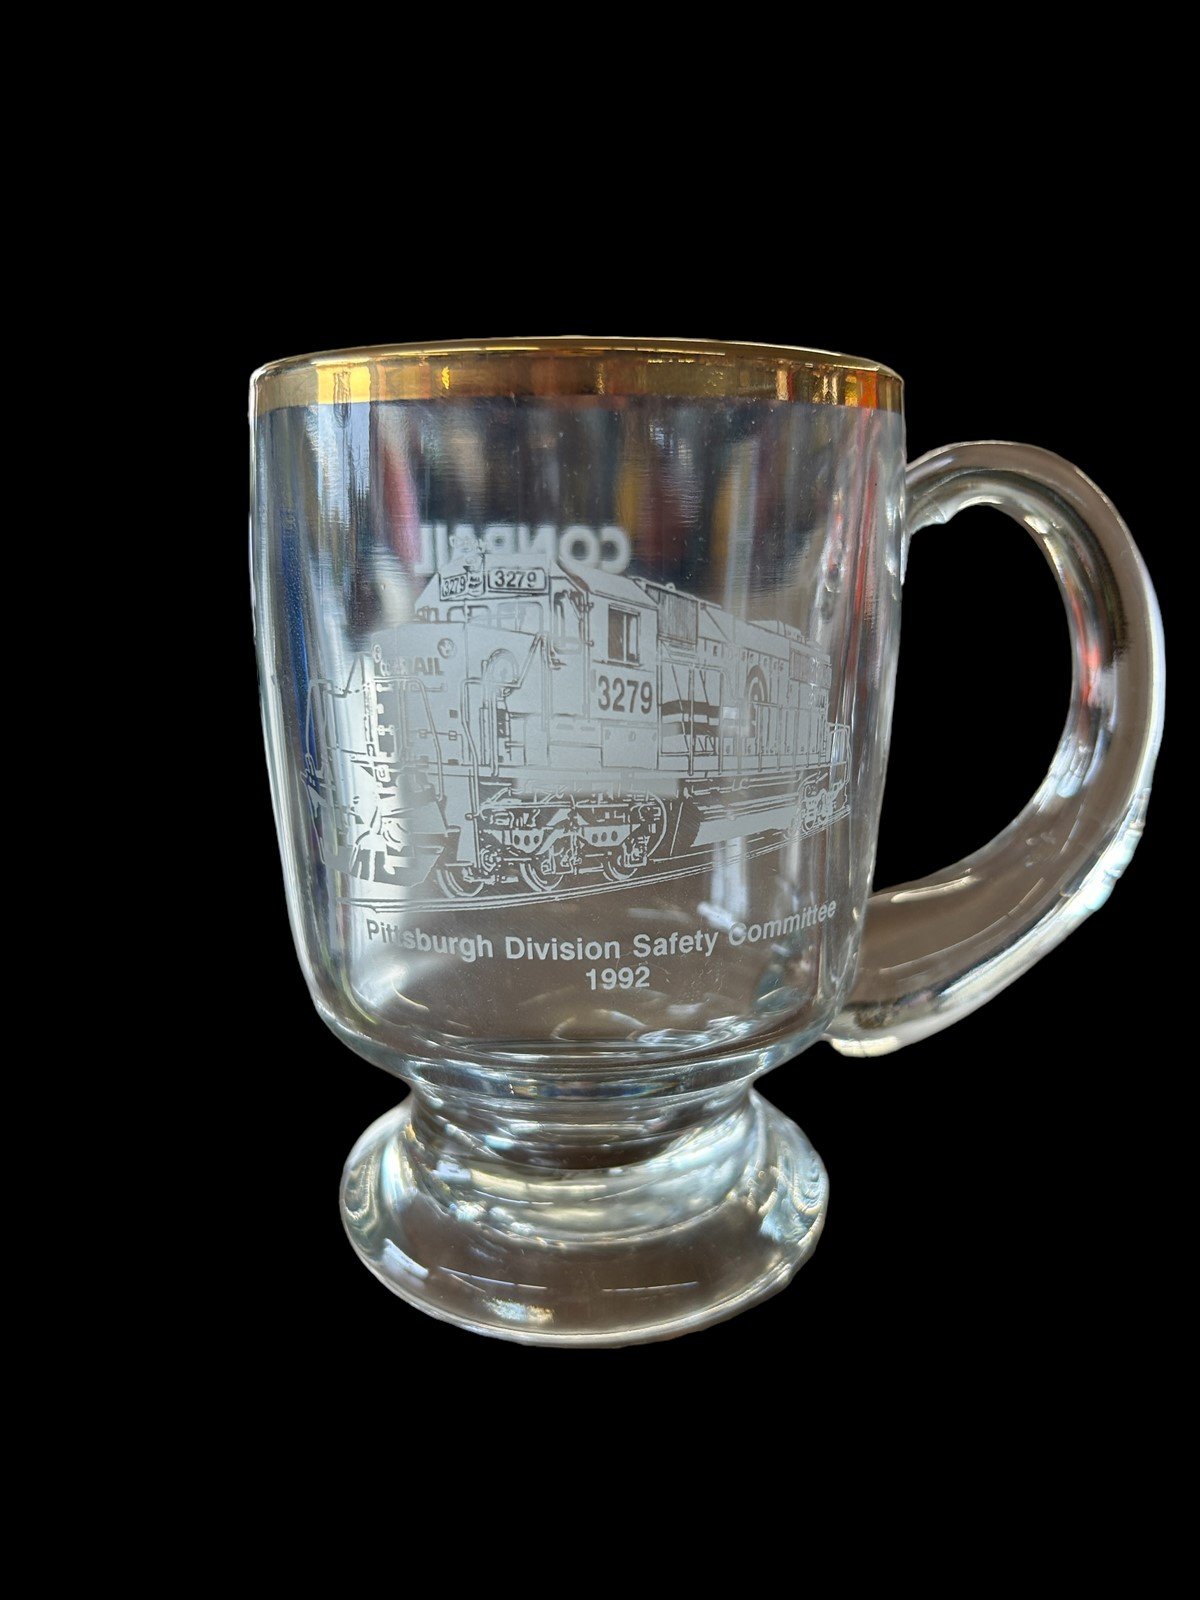 Glass Mug Pittsburgh Division Safety Committee 1992 Conrail Train Engine Gold